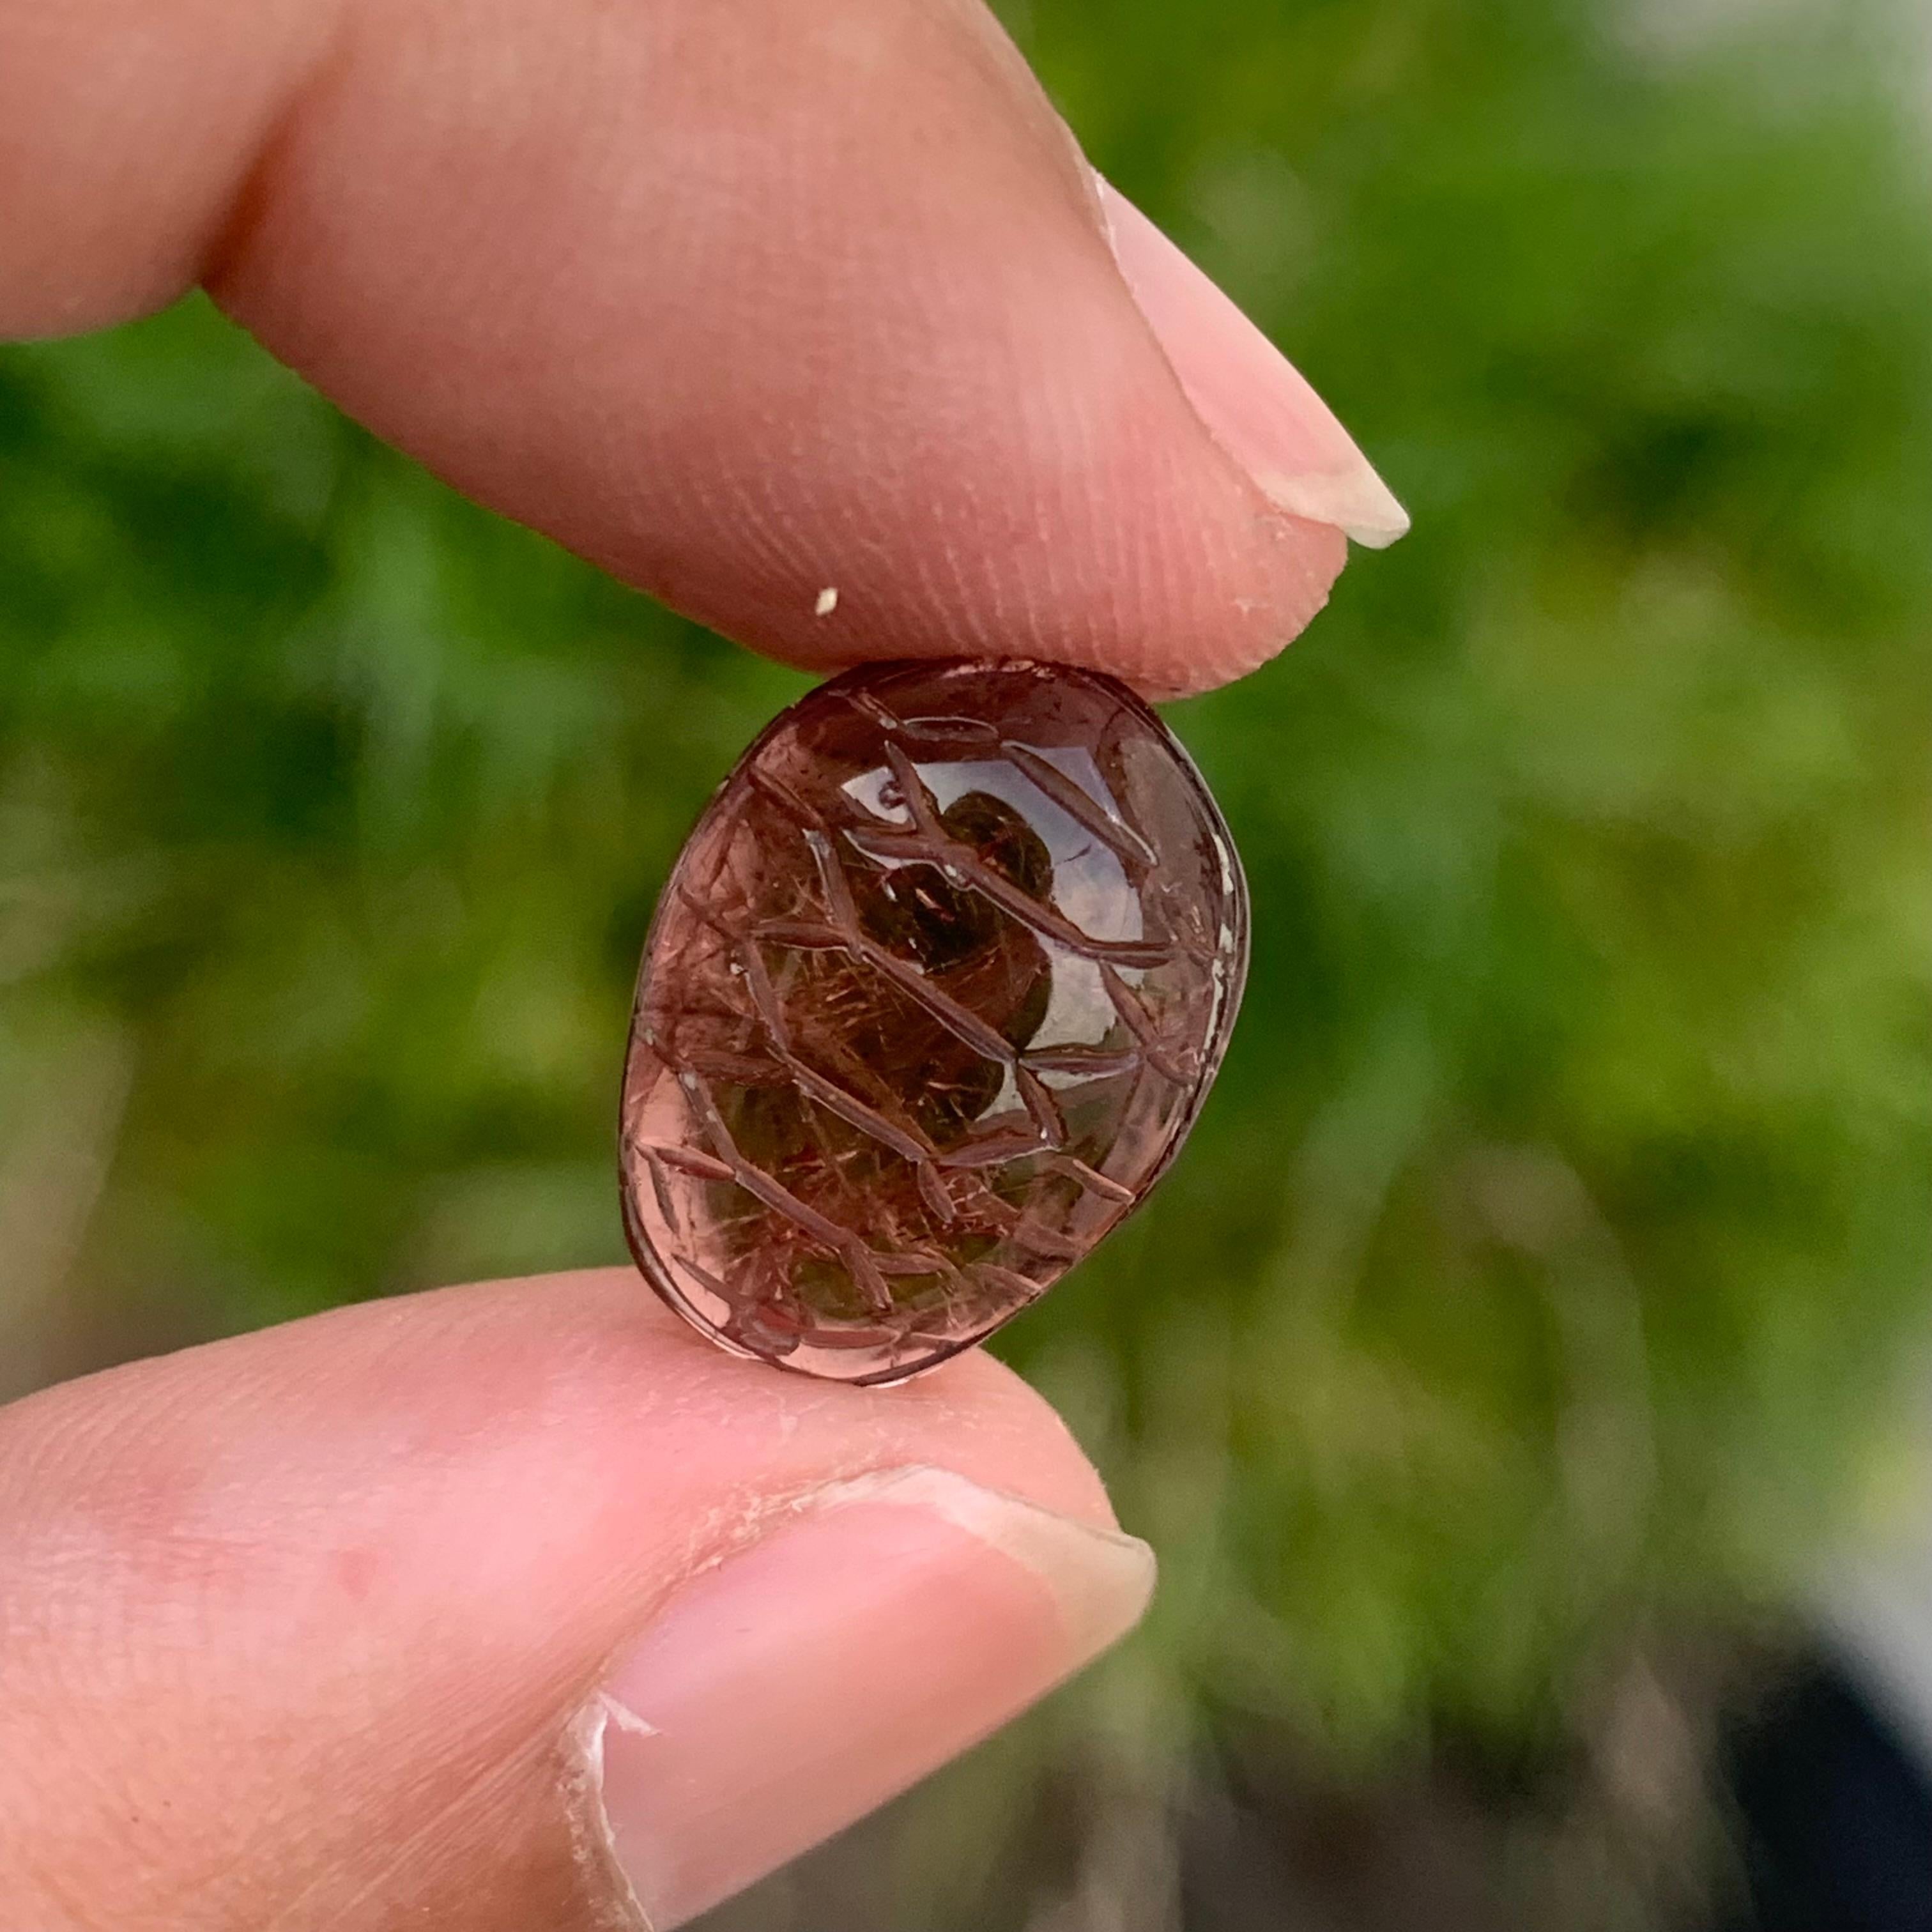 Carved 7.90 Carat Lovely Loose Peach Color Tourmaline Carving From Madagascar Africa For Sale